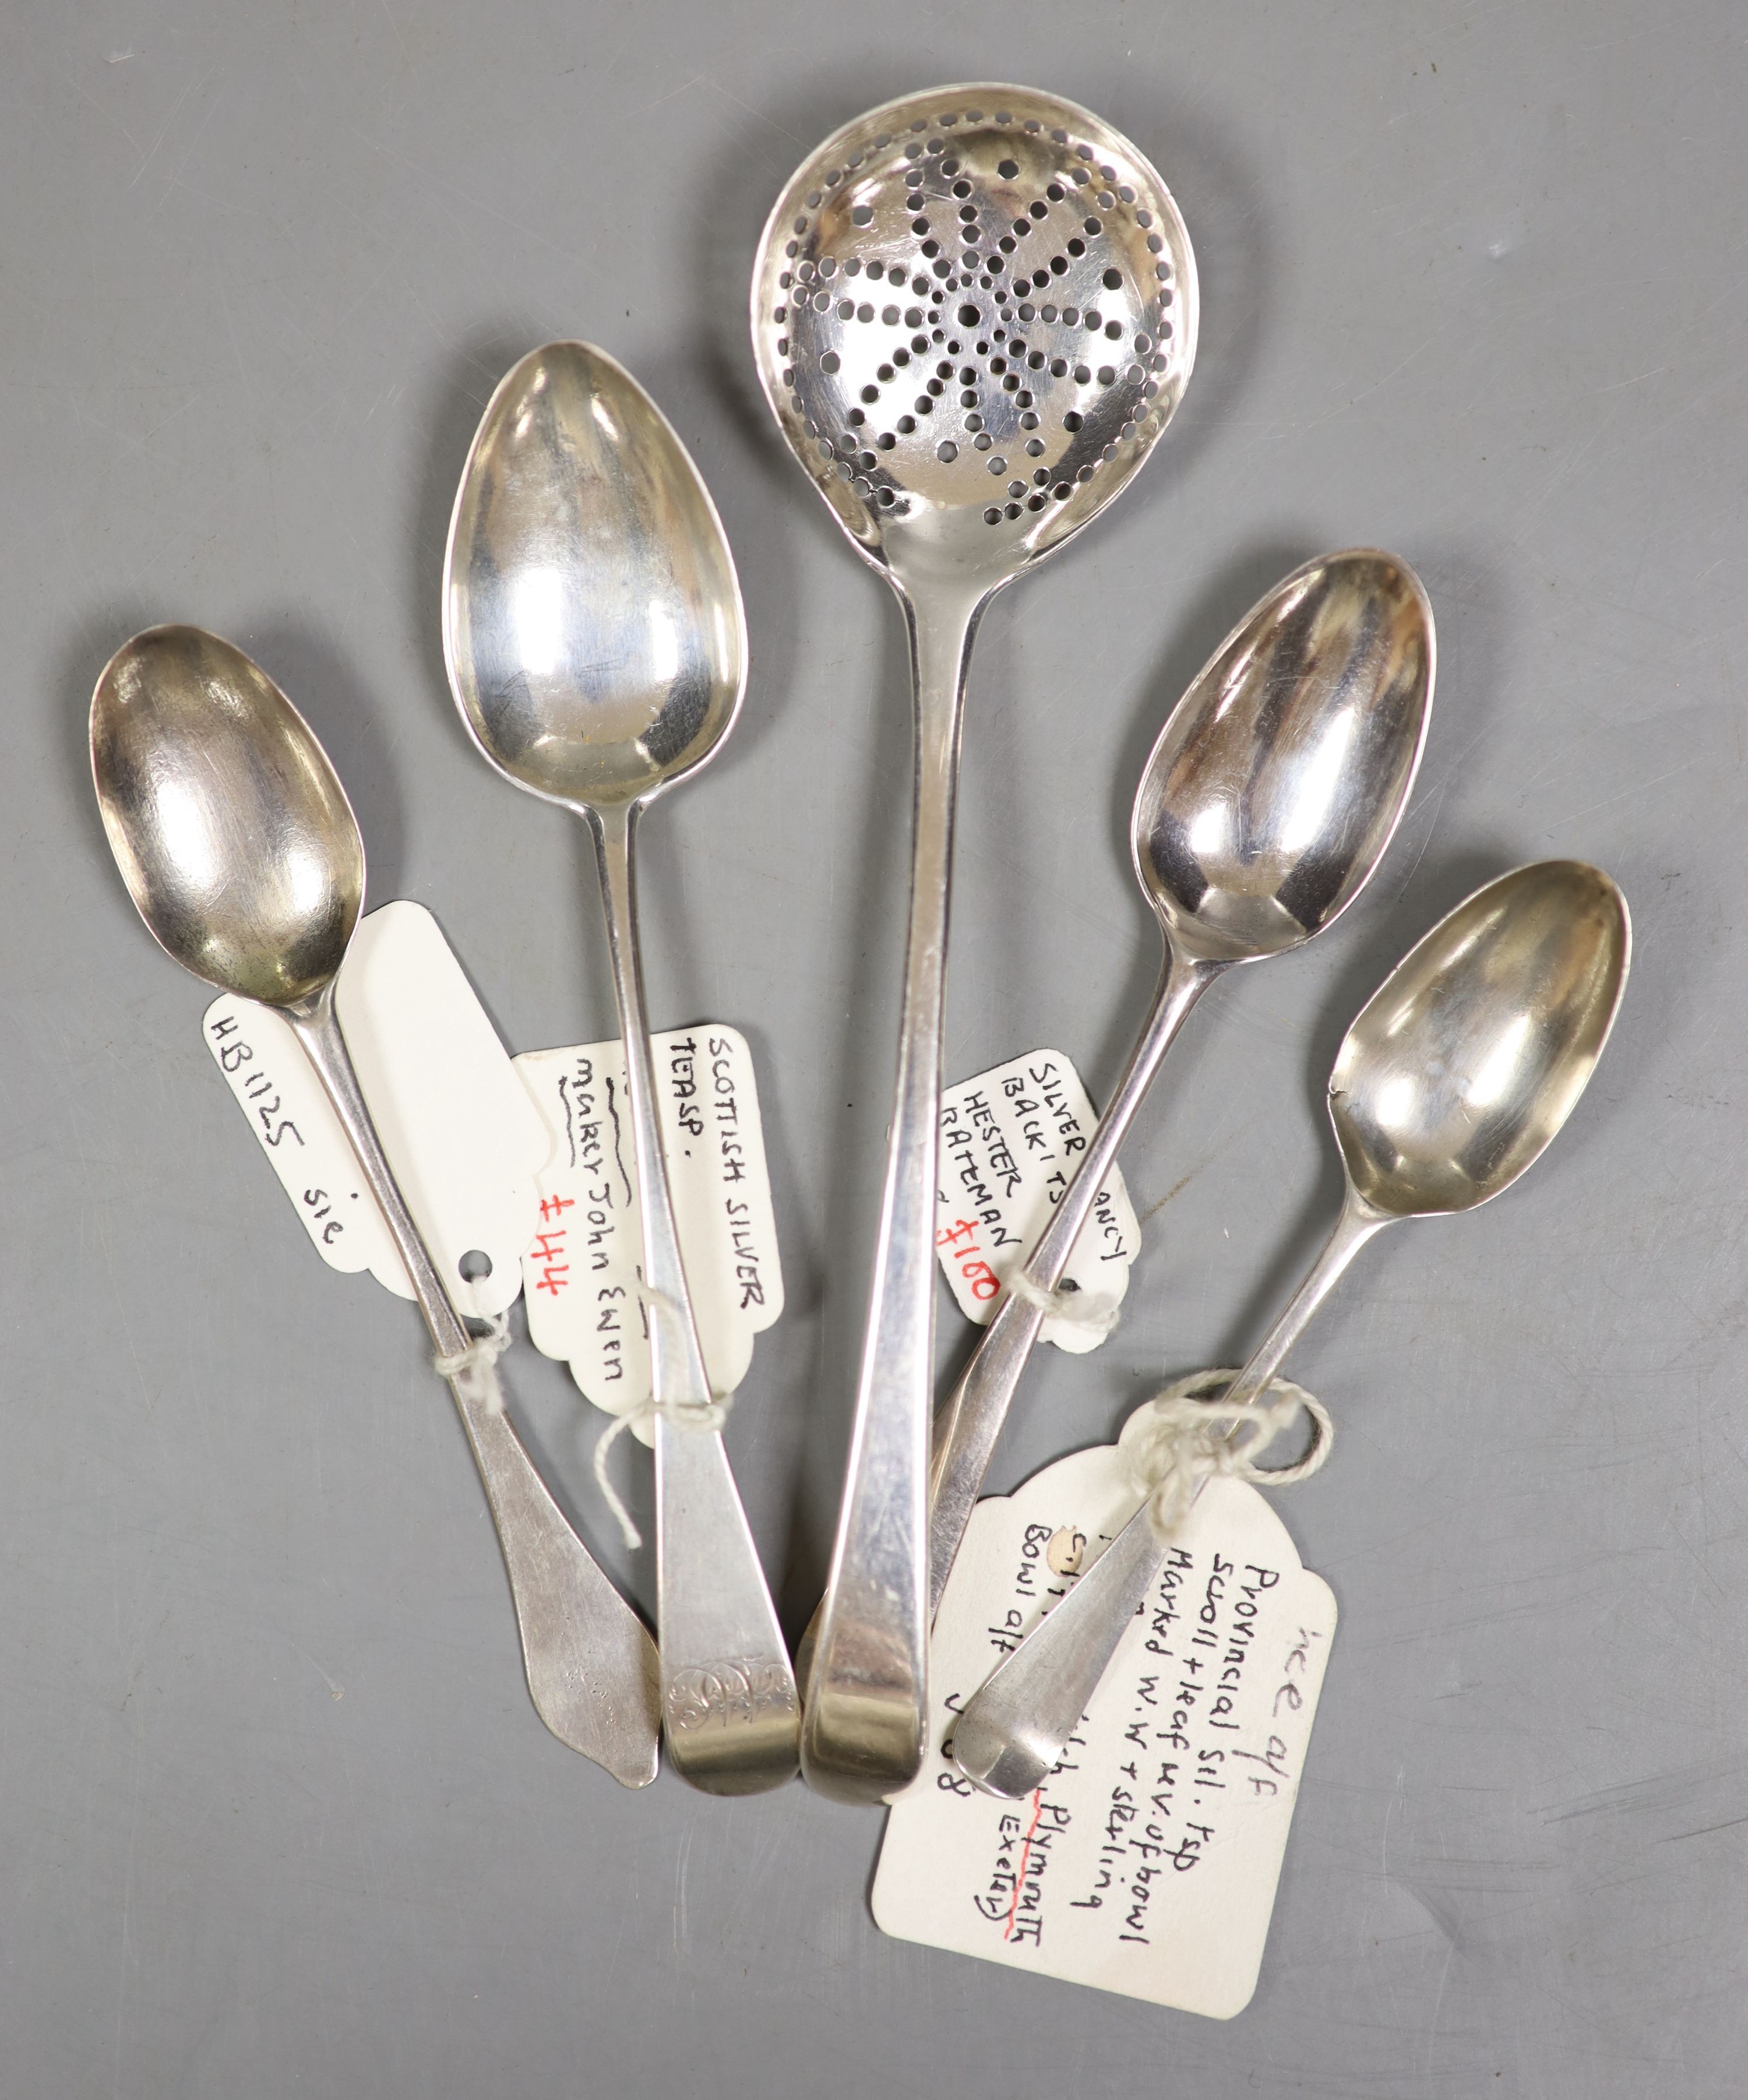 A George III silver lace back Hanovarian pattern teaspoon by Hester Bateman, 11.7cm, an antique dog nose spoon, 11.4cm, two other teaspoons including John Ewan and an unusual sifter spoon stamped twice with dove of peace